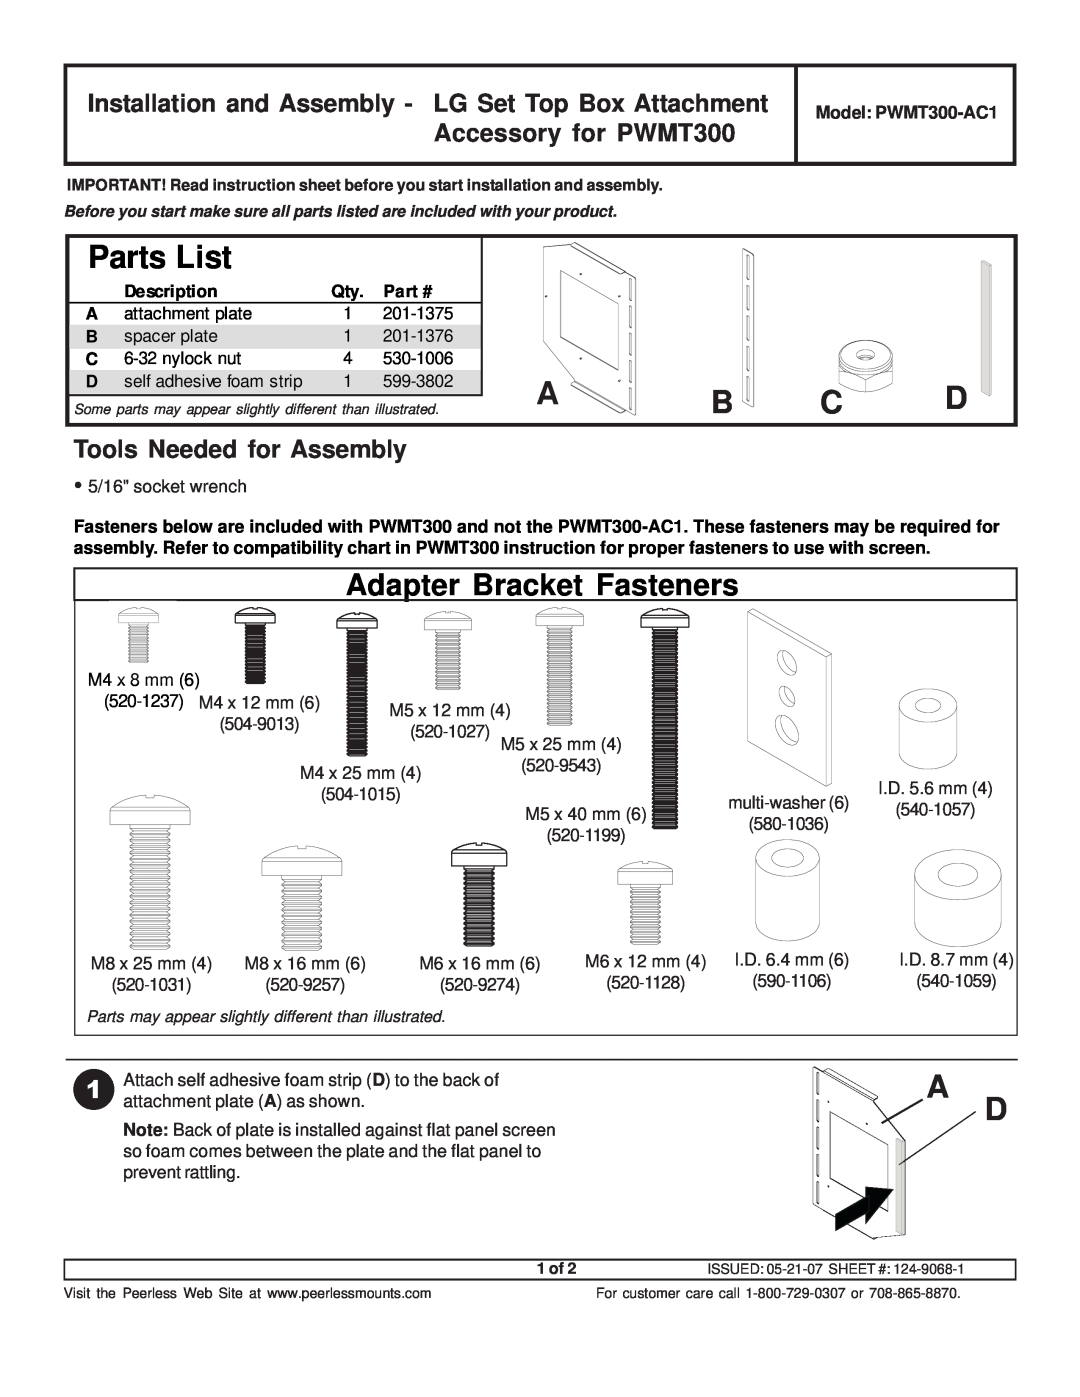 LG Electronics PWMT300-AC1 instruction sheet Tools Needed for Assembly, Description, Parts List, Adapter Bracket Fasteners 